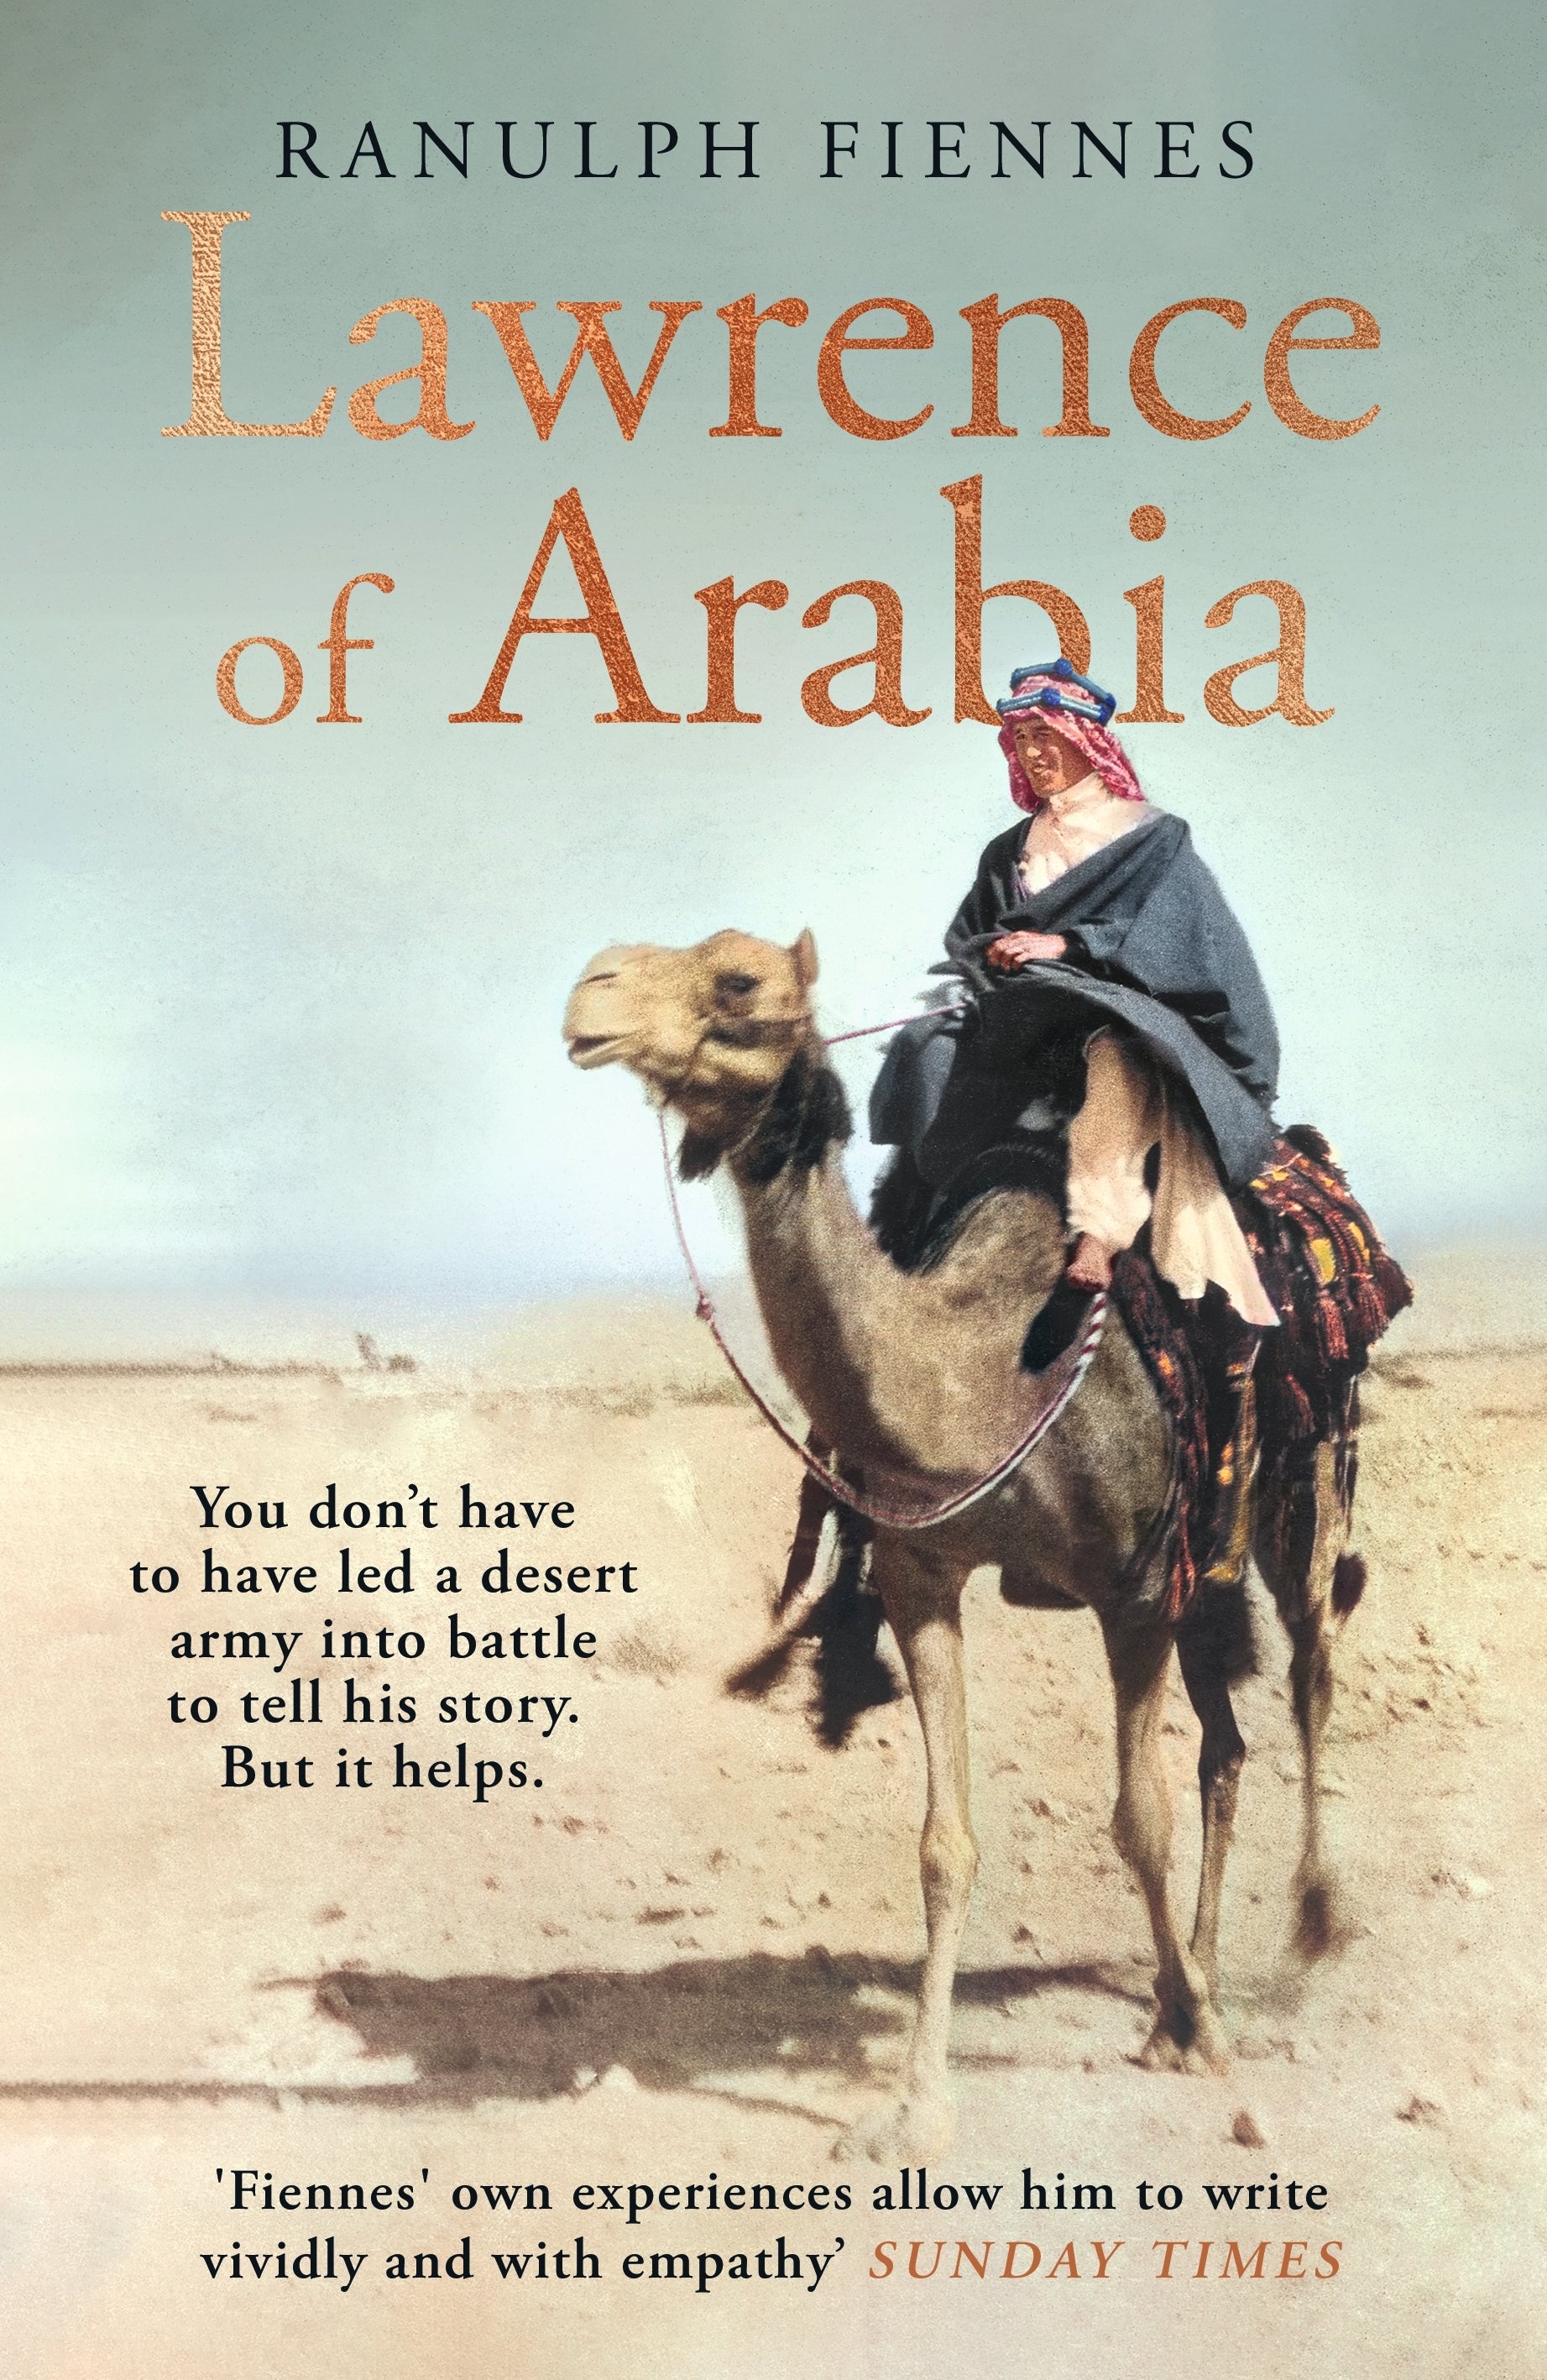 Lawrence of Arabia An in-depth glance at the life of a 20th Century legend by Ranulph Fiennes